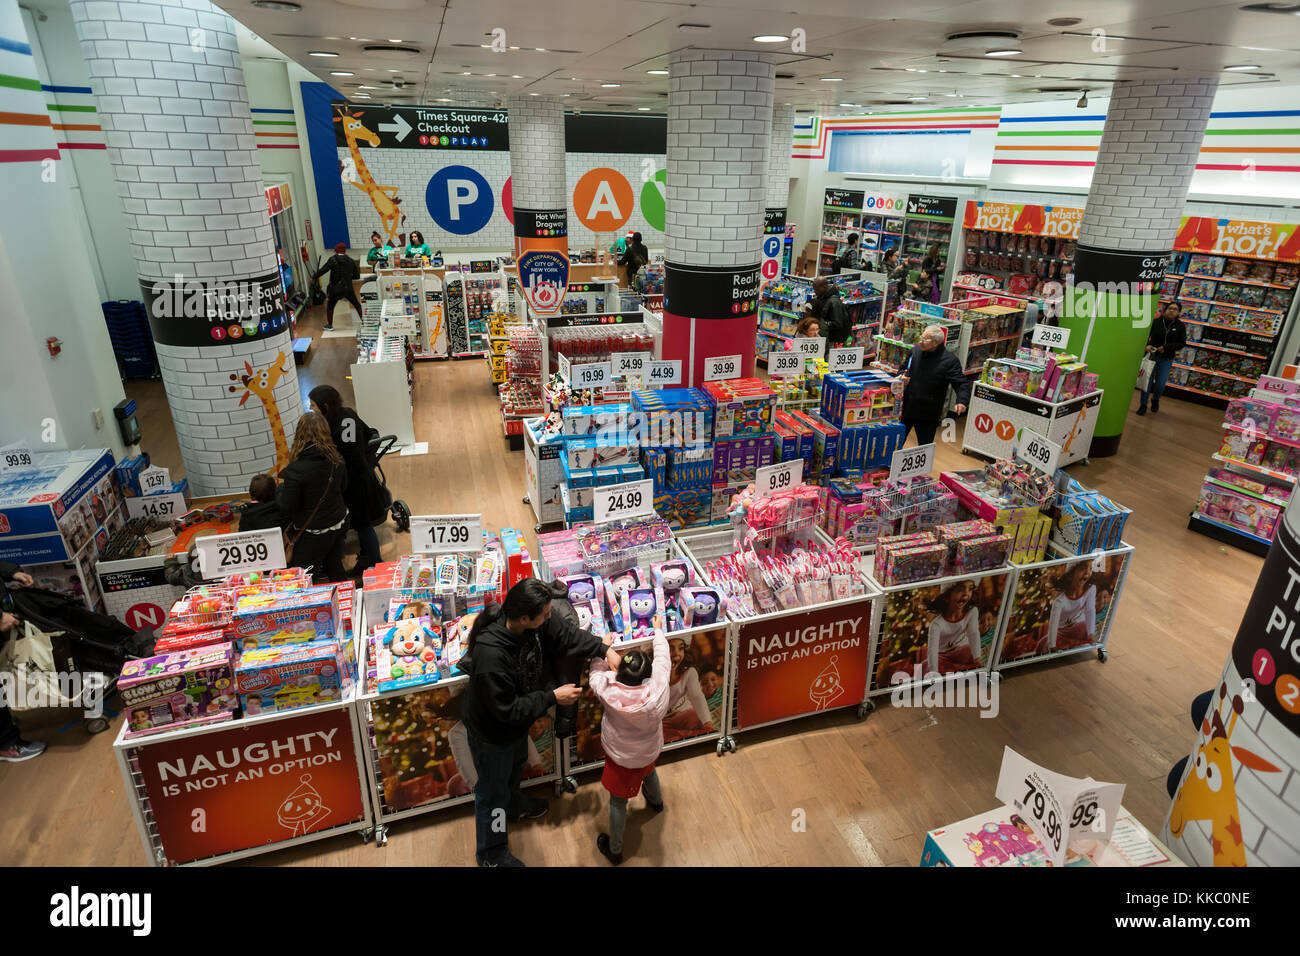 The Toys R Us location in Times Square in New York on Sunday, November 26, 2017. The temporary location is a return to the area after closing their former store in 2015 and will remain open at least until the holidays. (© Richard B. Levine) Stock Photo